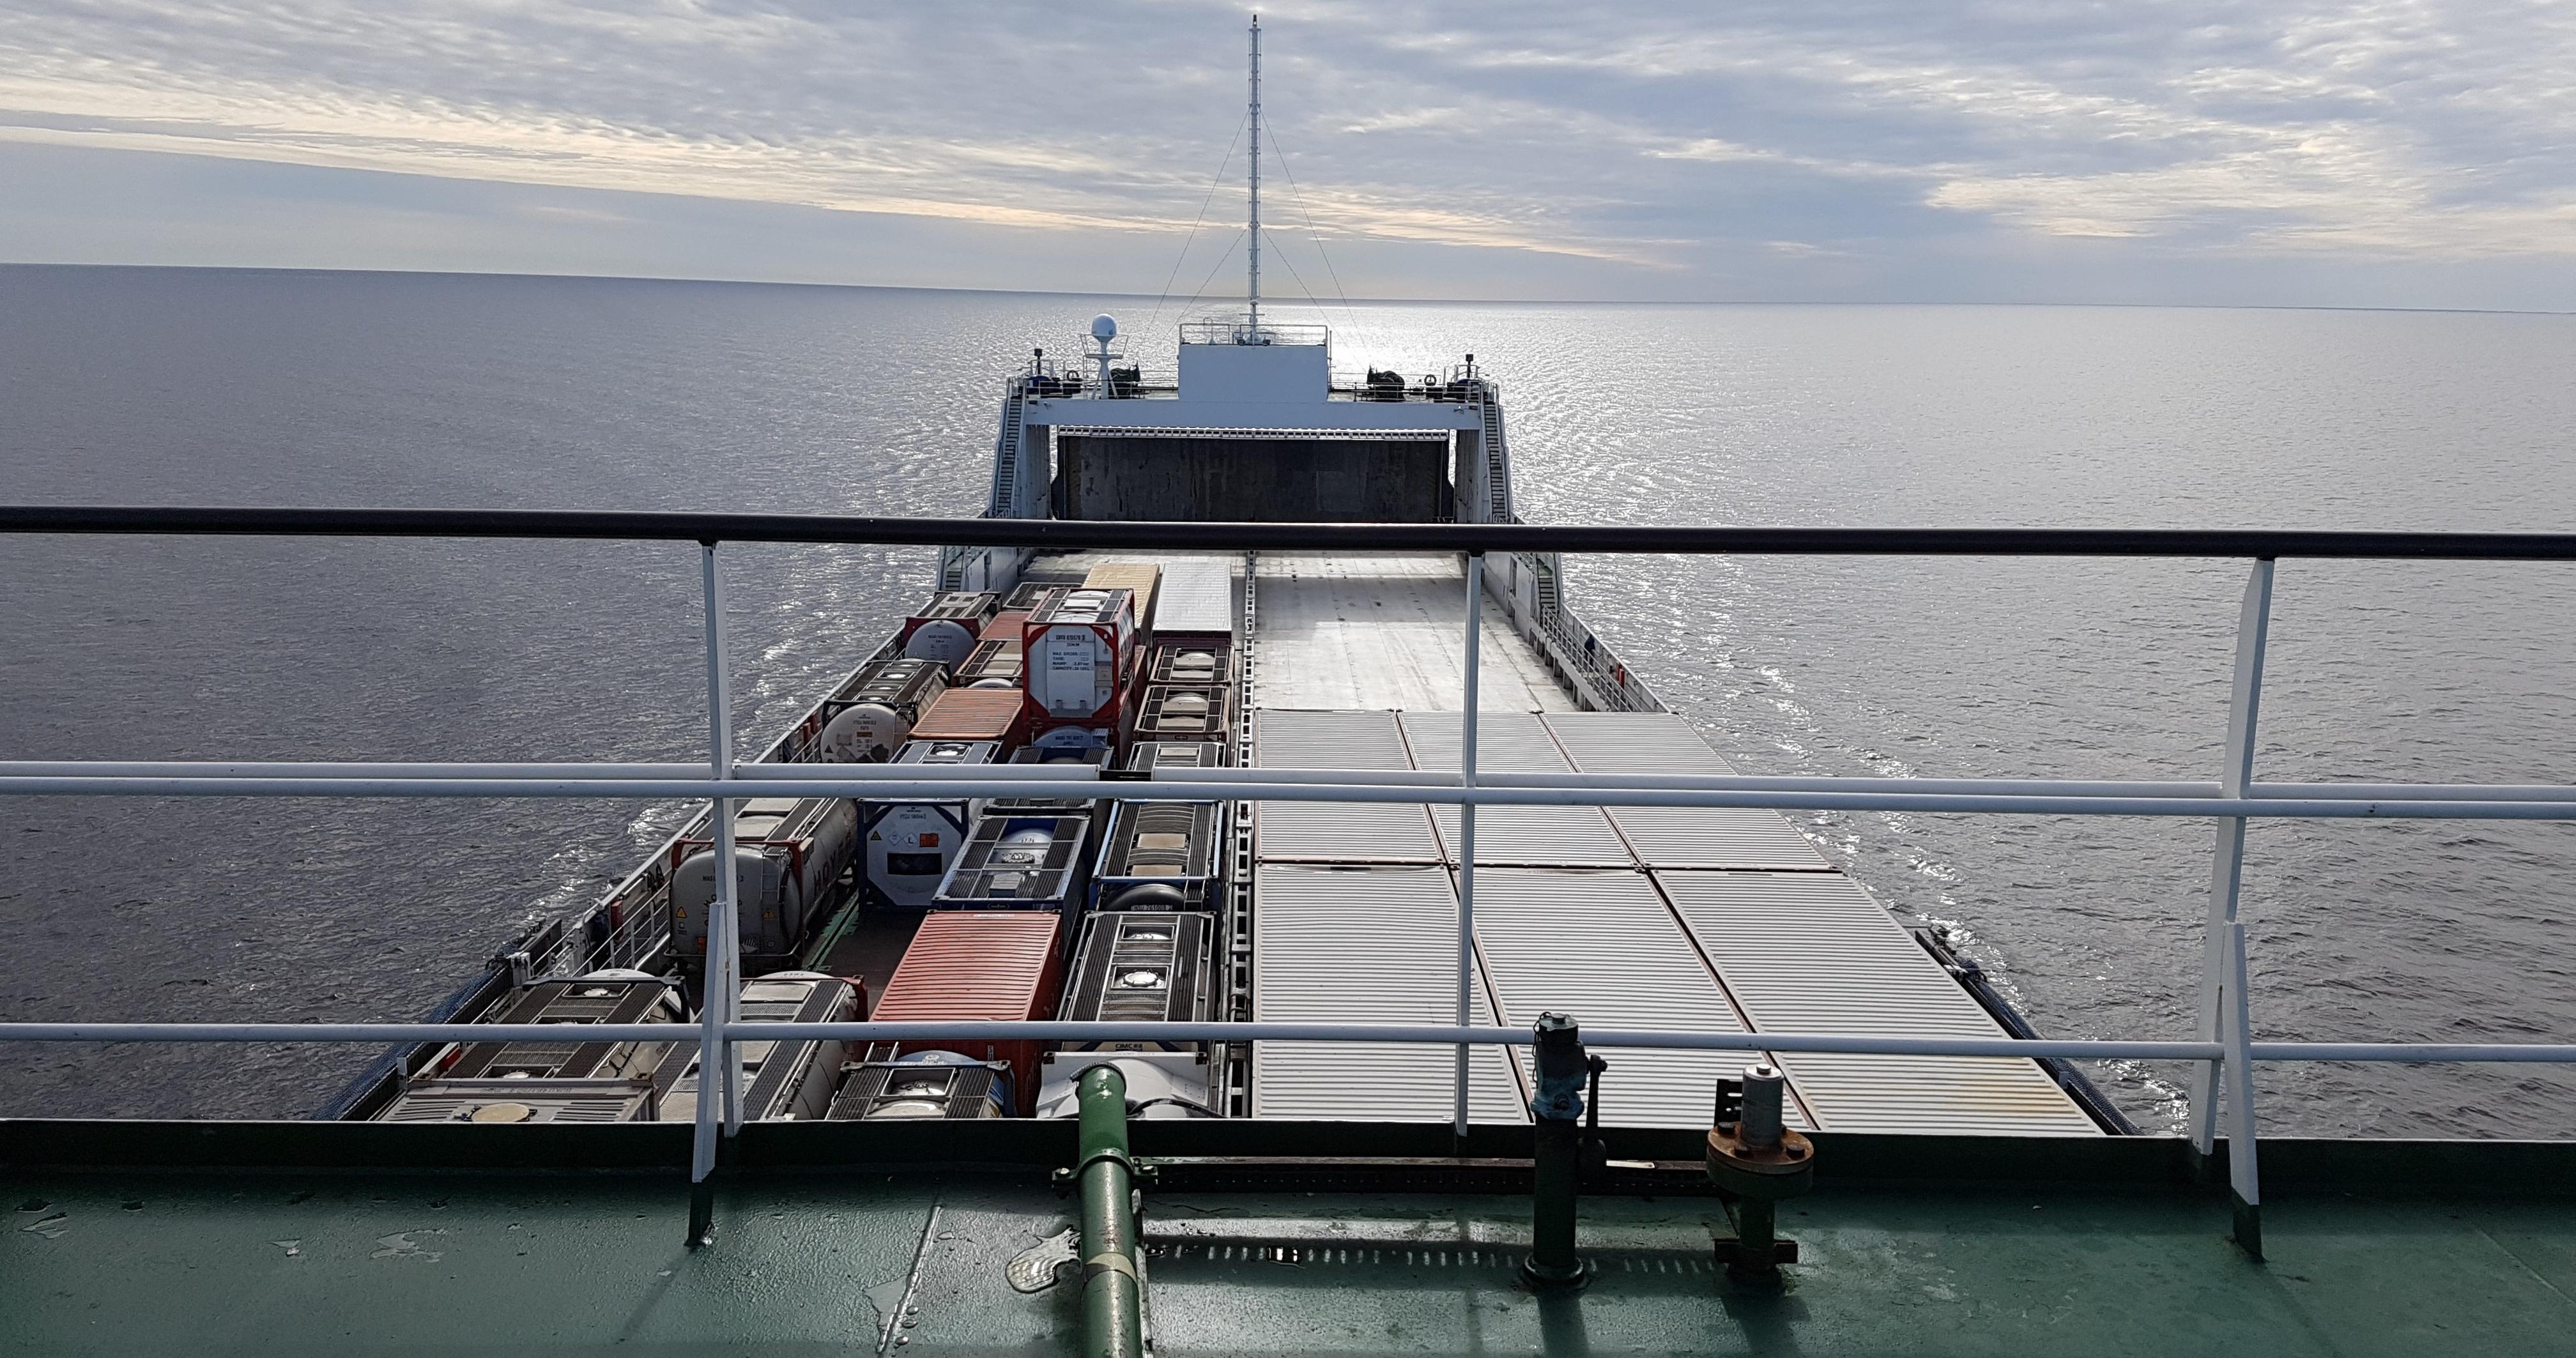 Photo overlooking the deck of a cargo ship